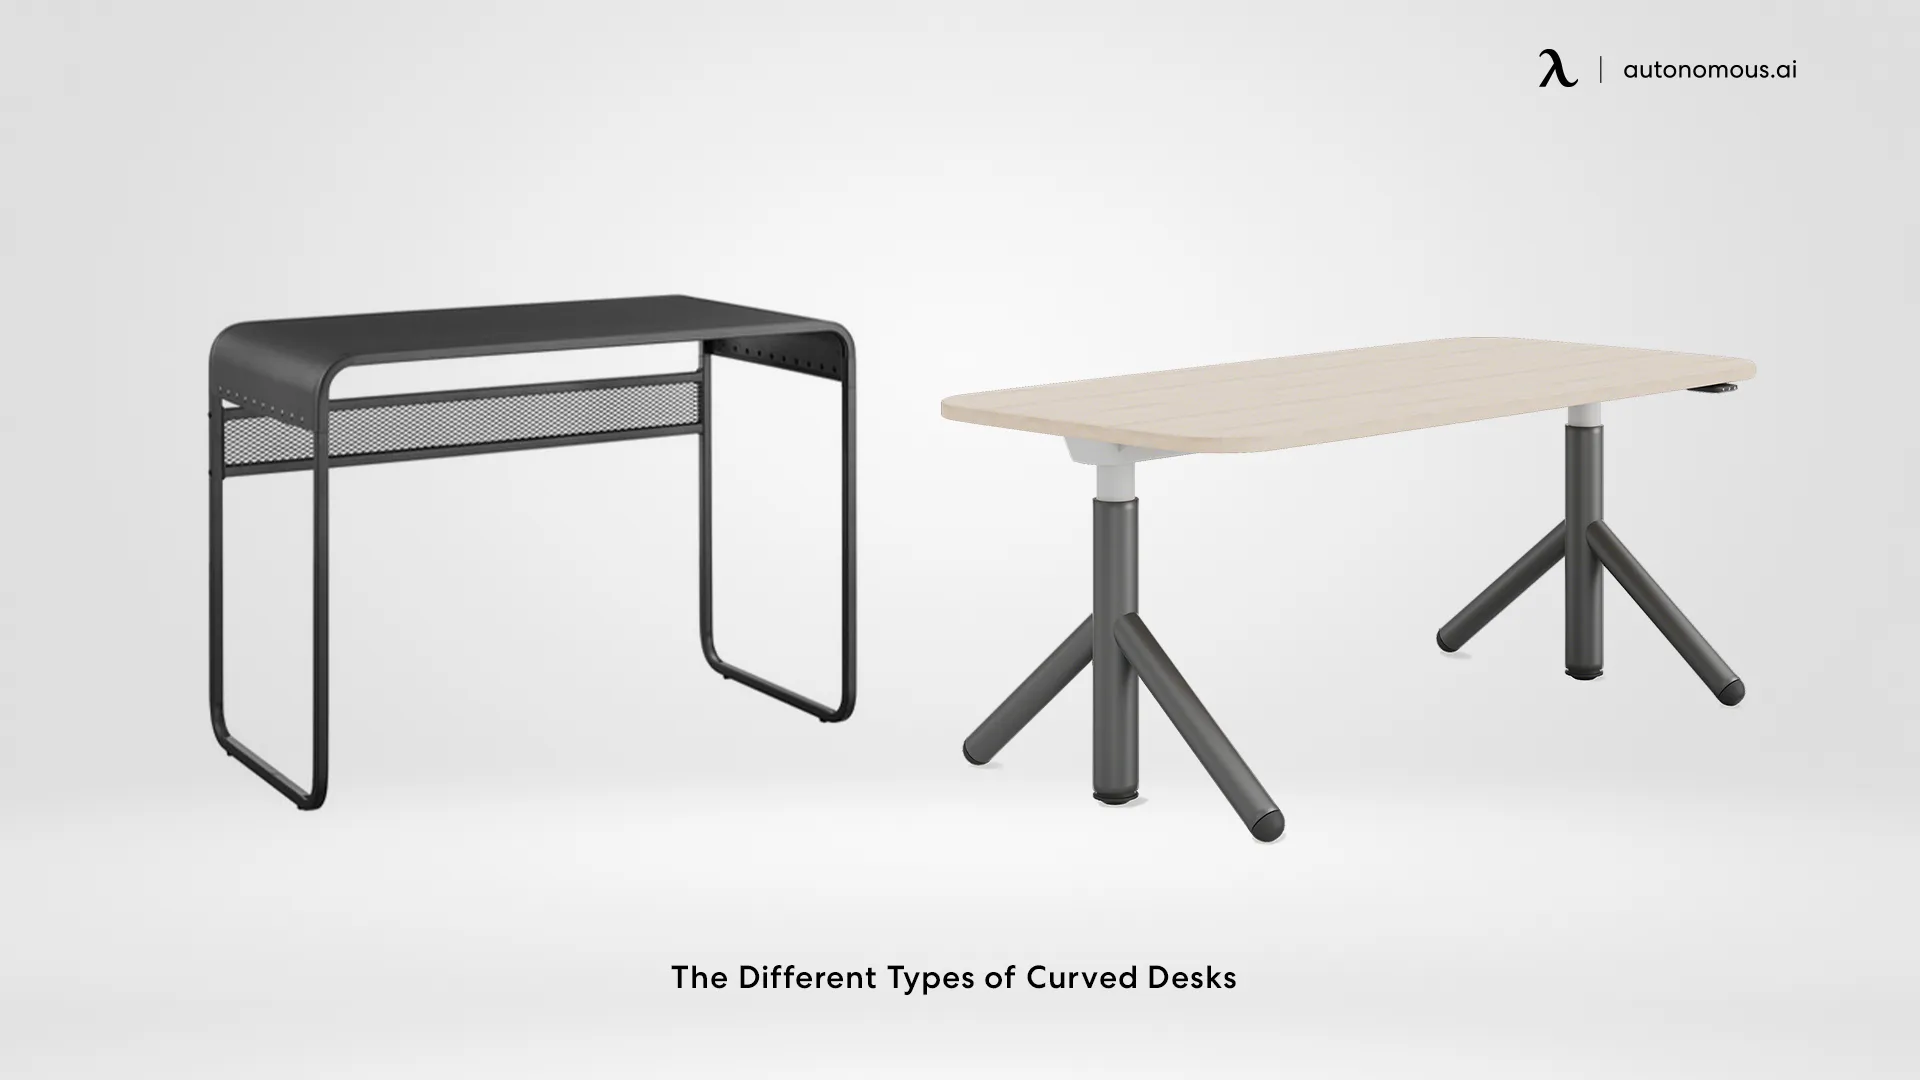 The Different Types of Curved Desks